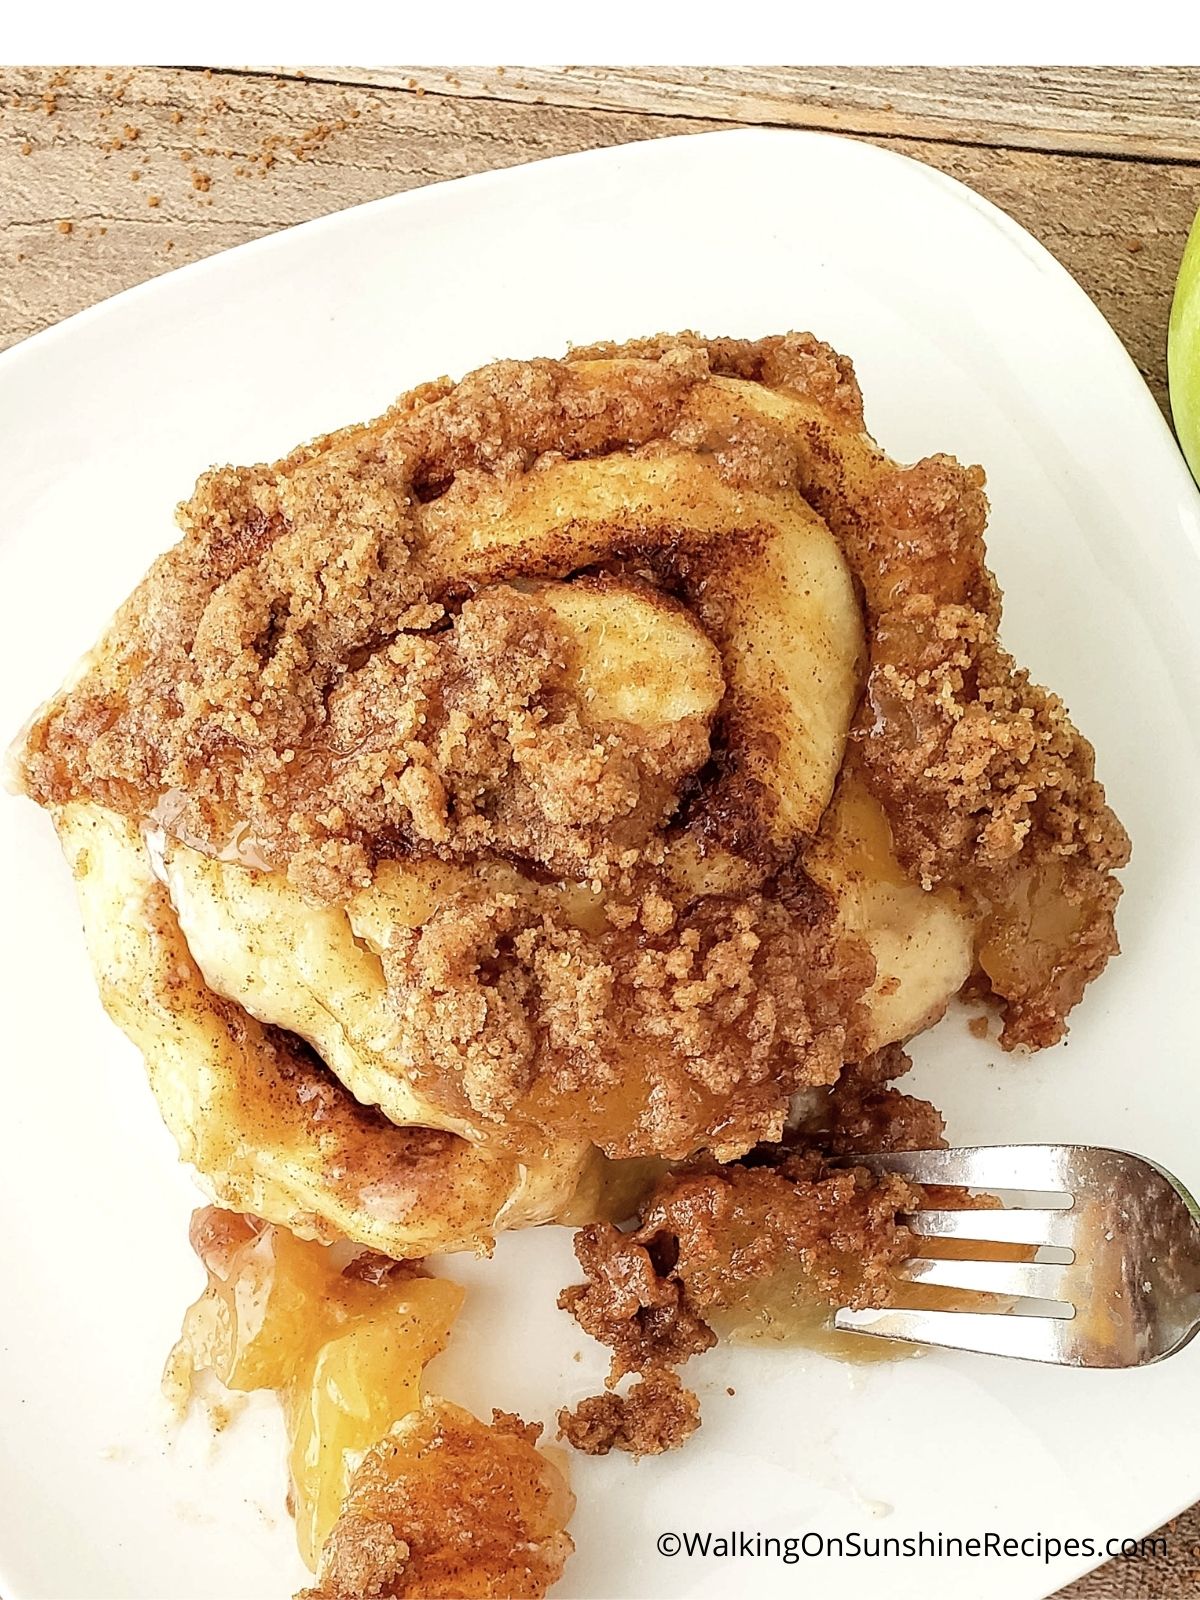 One cinnamon roll with apple pie filling on plate.